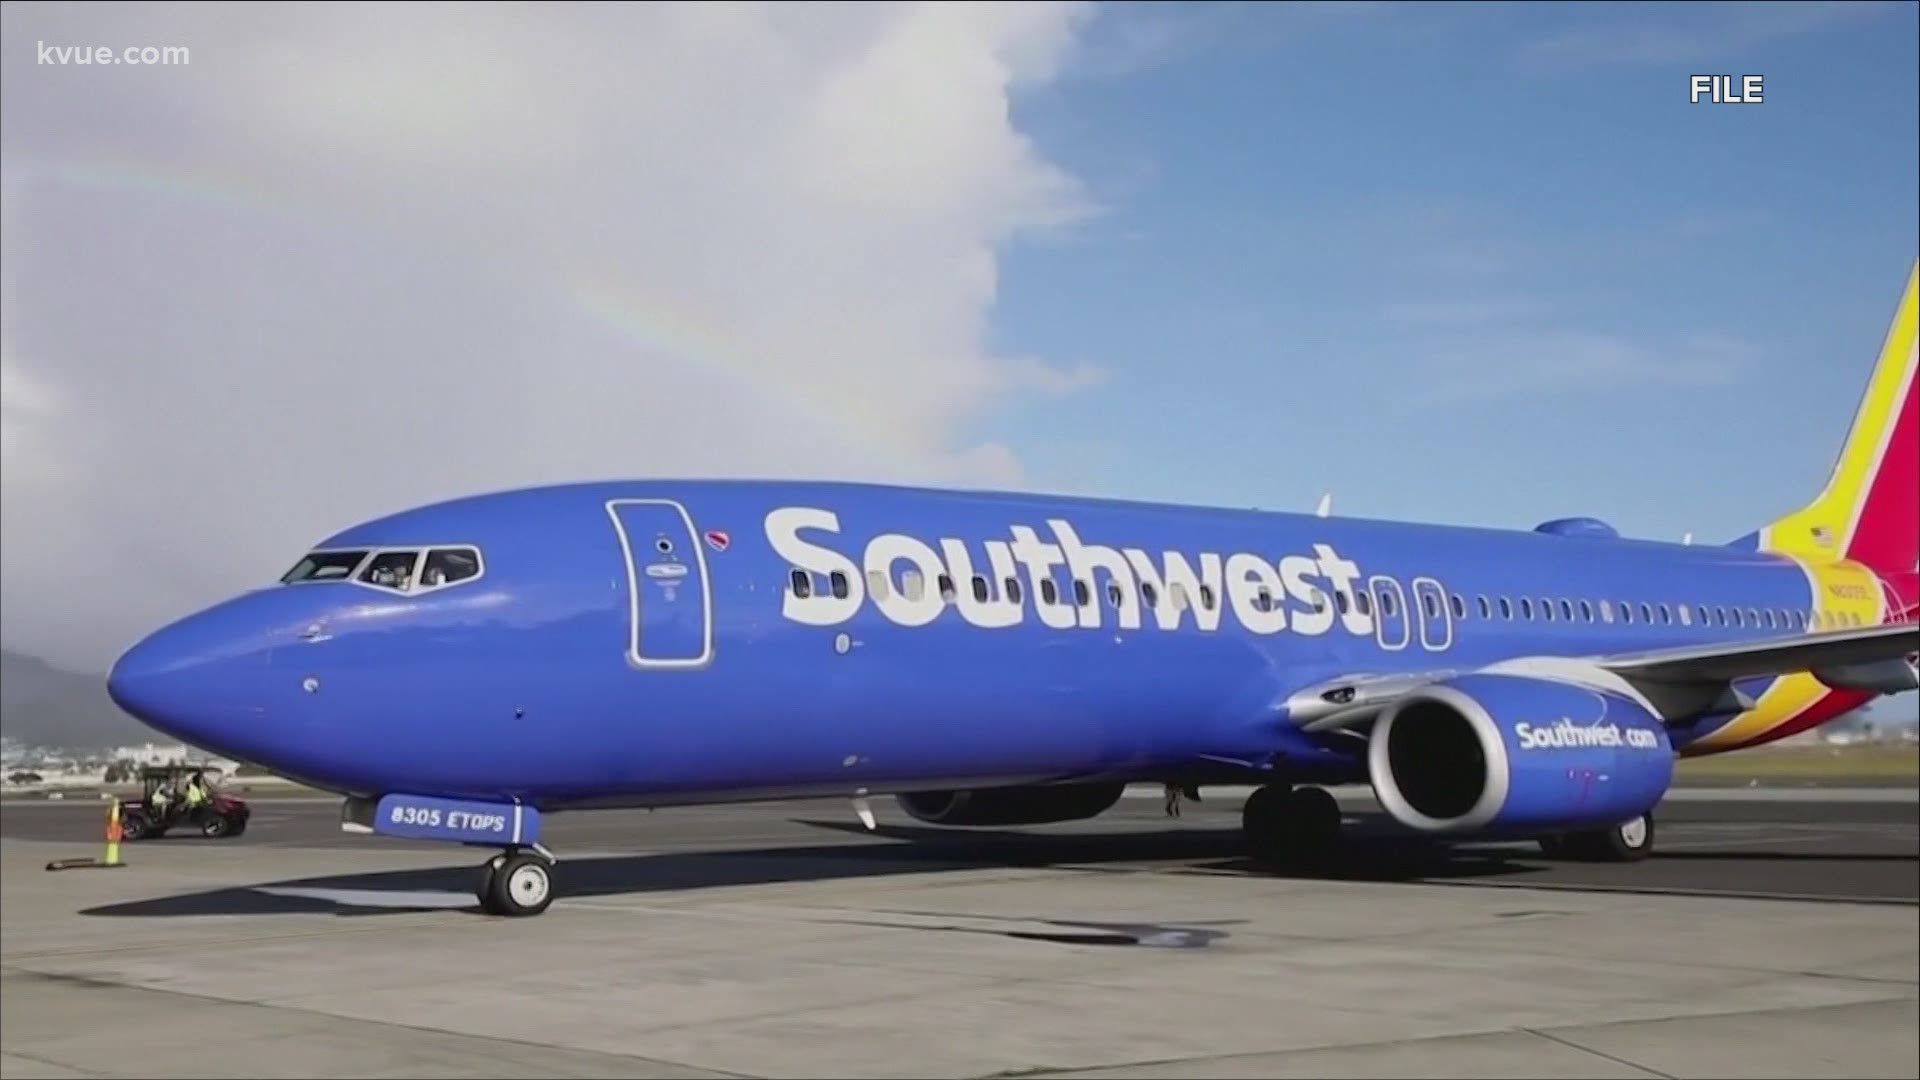 This summer, Austin's airport is offering more nonstop flights for Southwest Airlines customers.